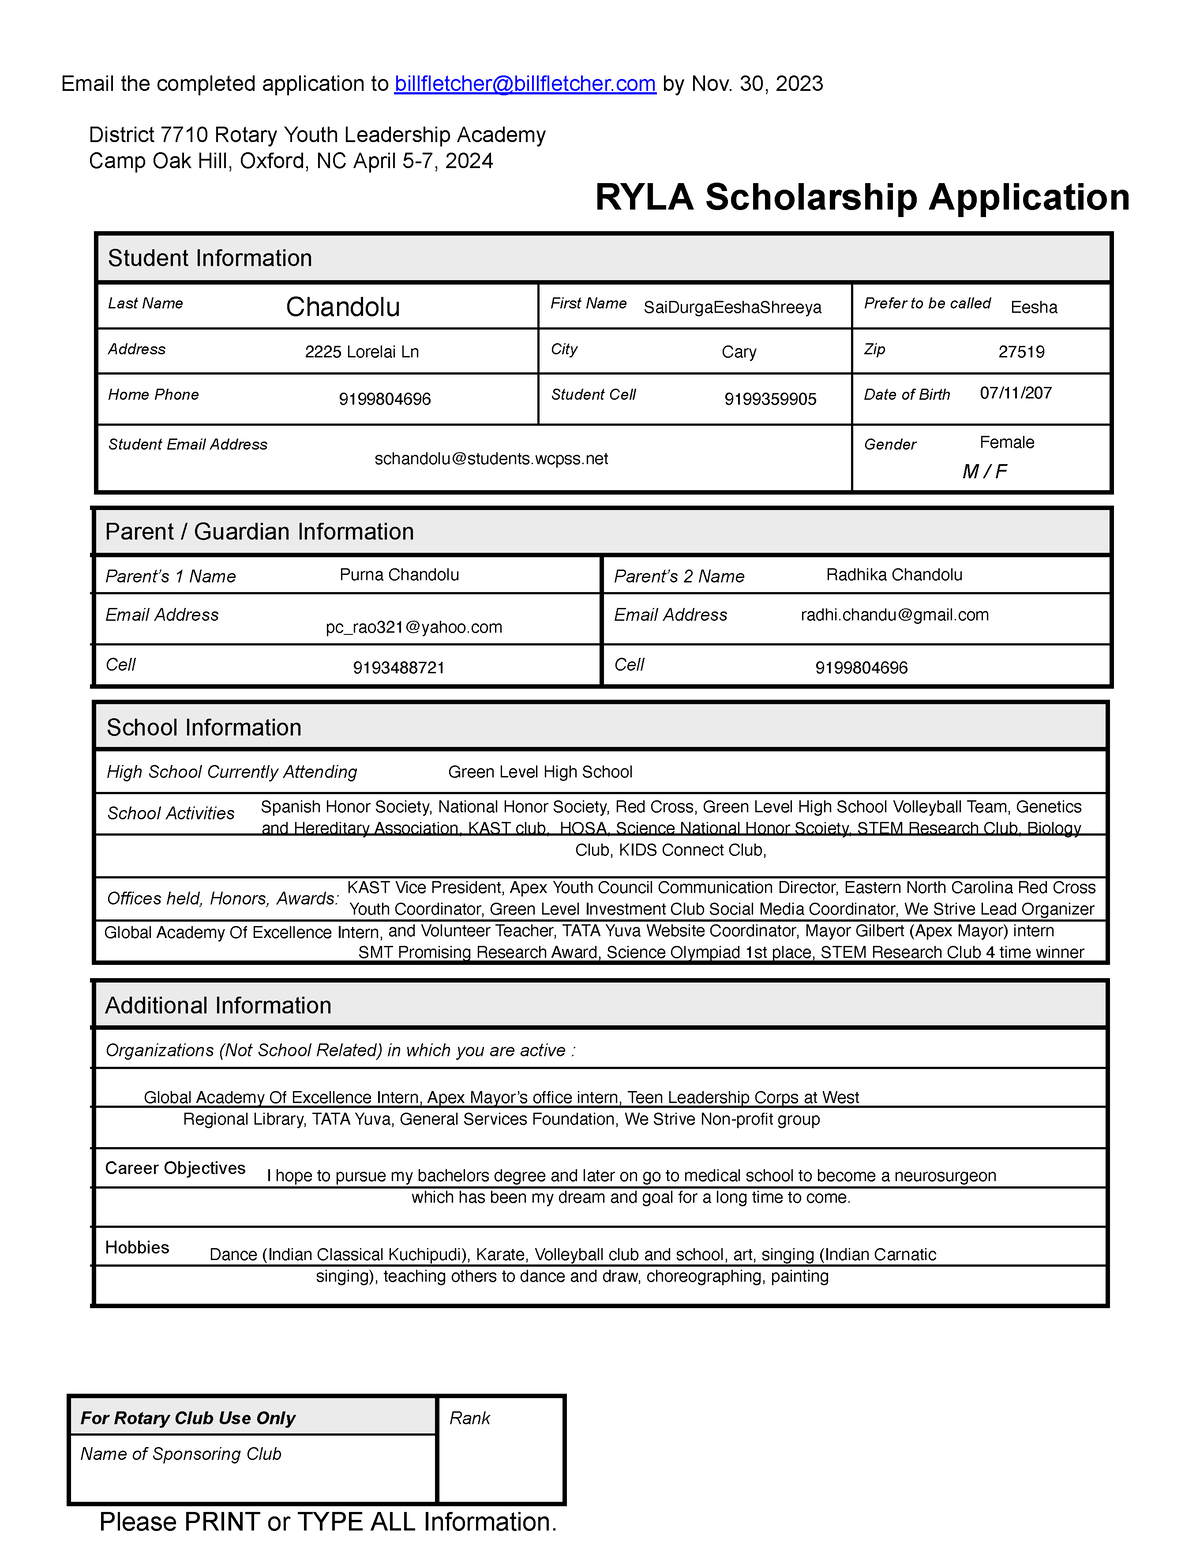 2024 RYLA Application It is helpful to look at Email the completed